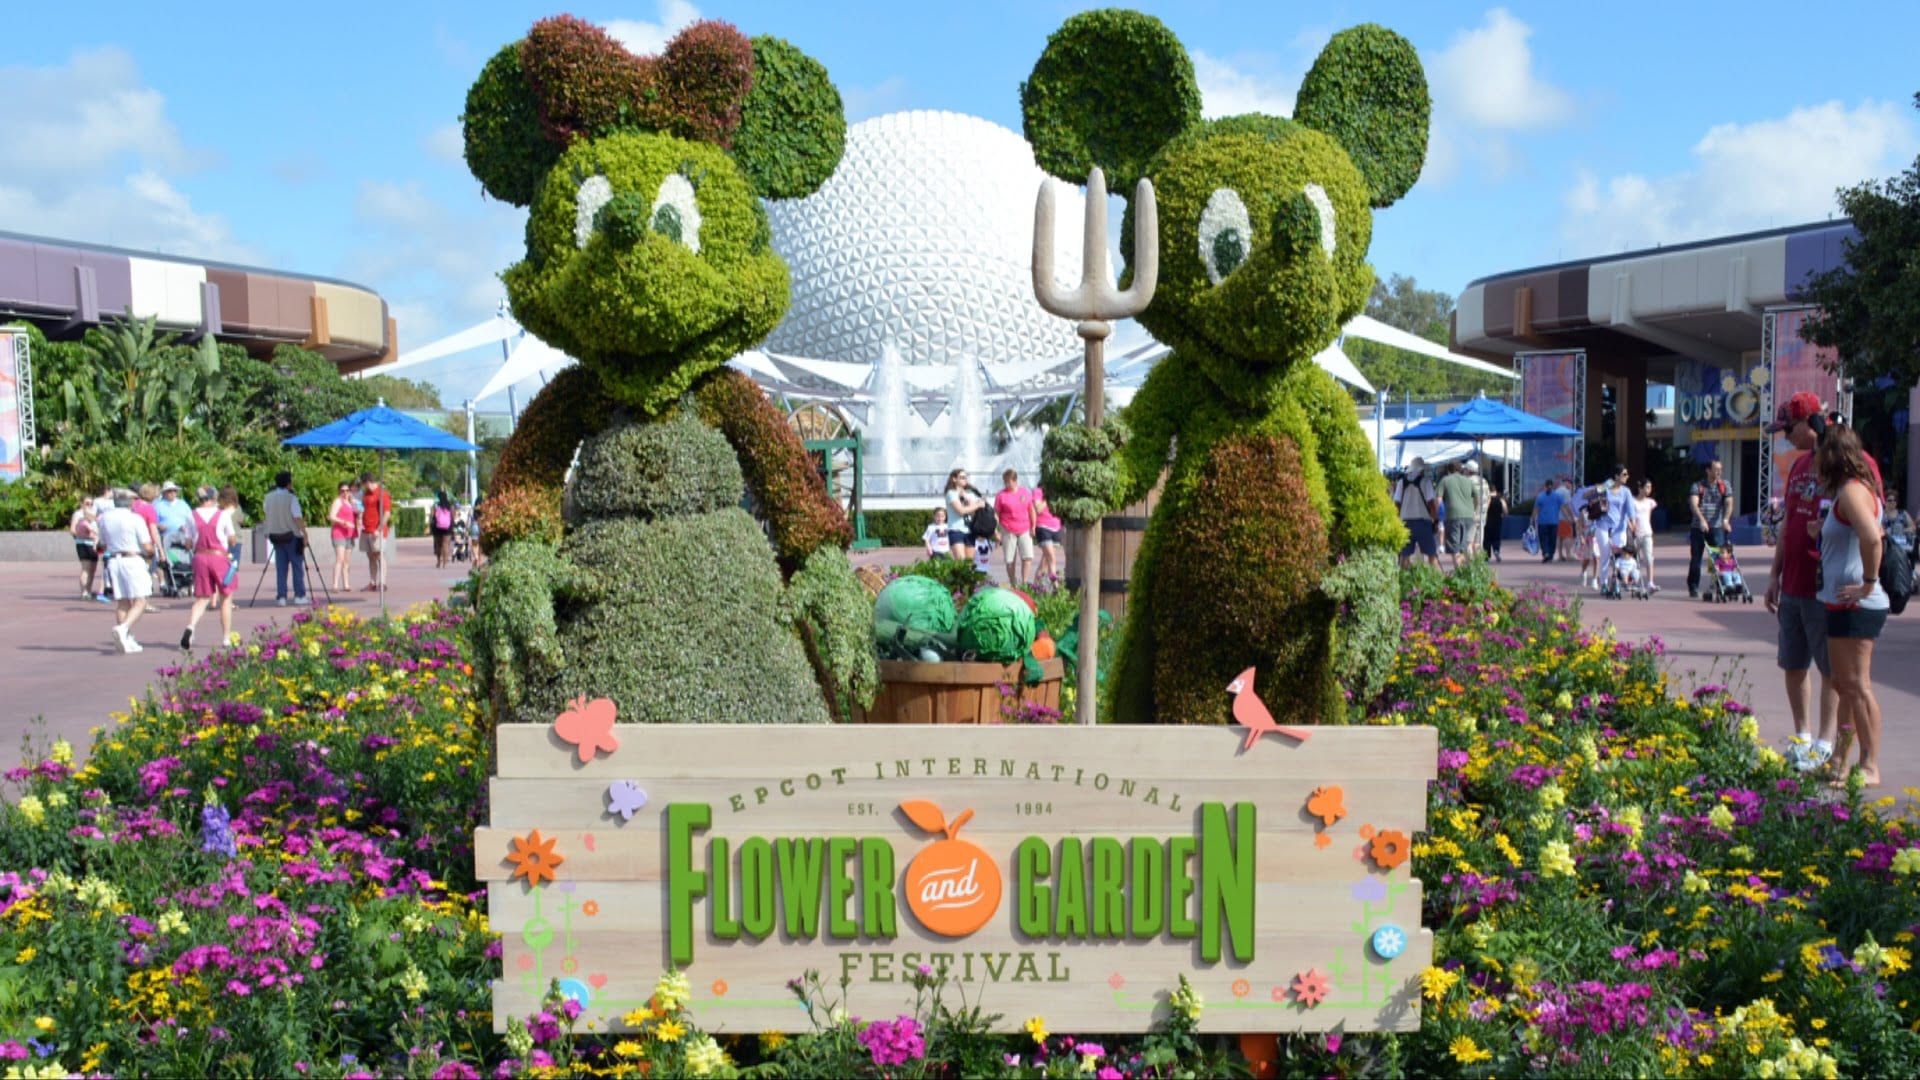 Epcot Flower and Garden Festival VIP Tours